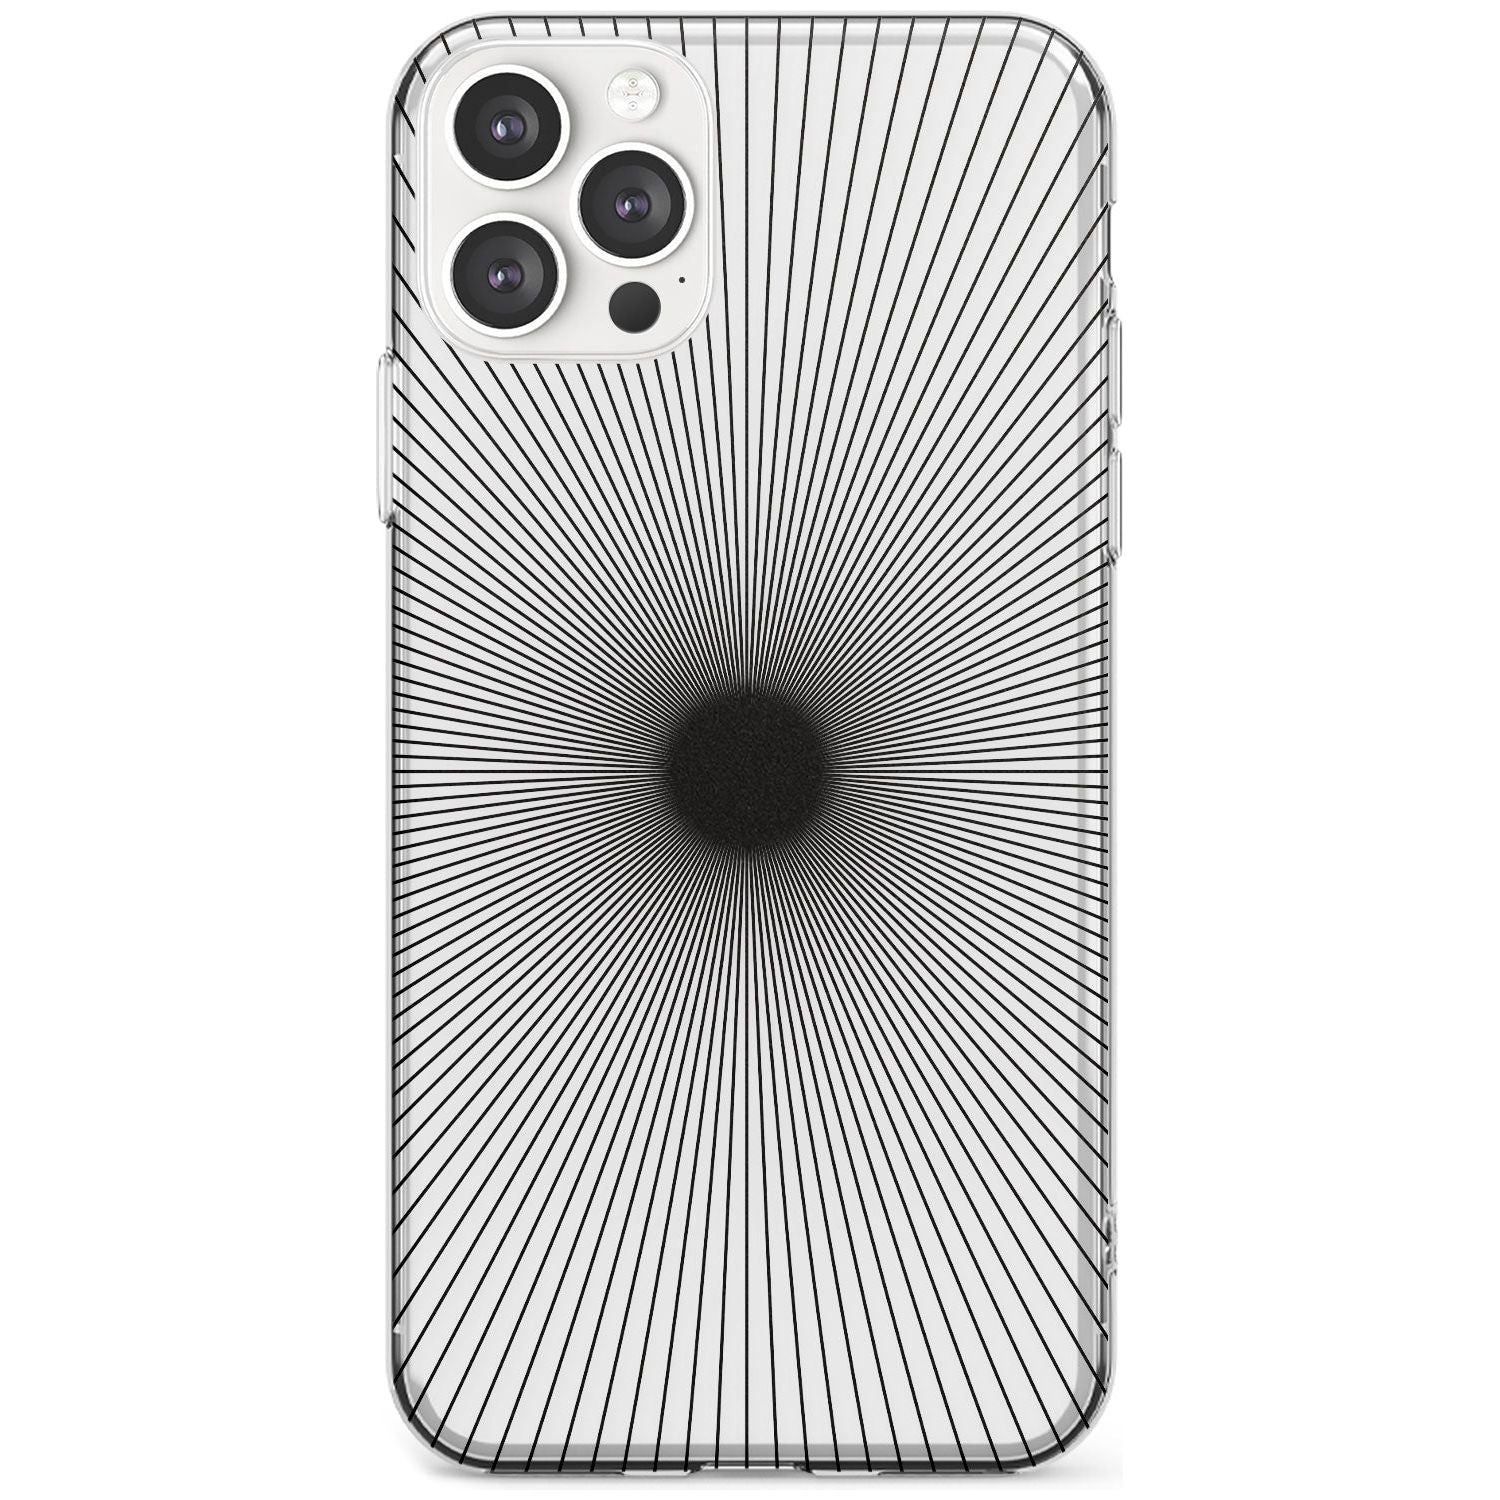 Abstract Lines: Sunburst Black Impact Phone Case for iPhone 11 Pro Max